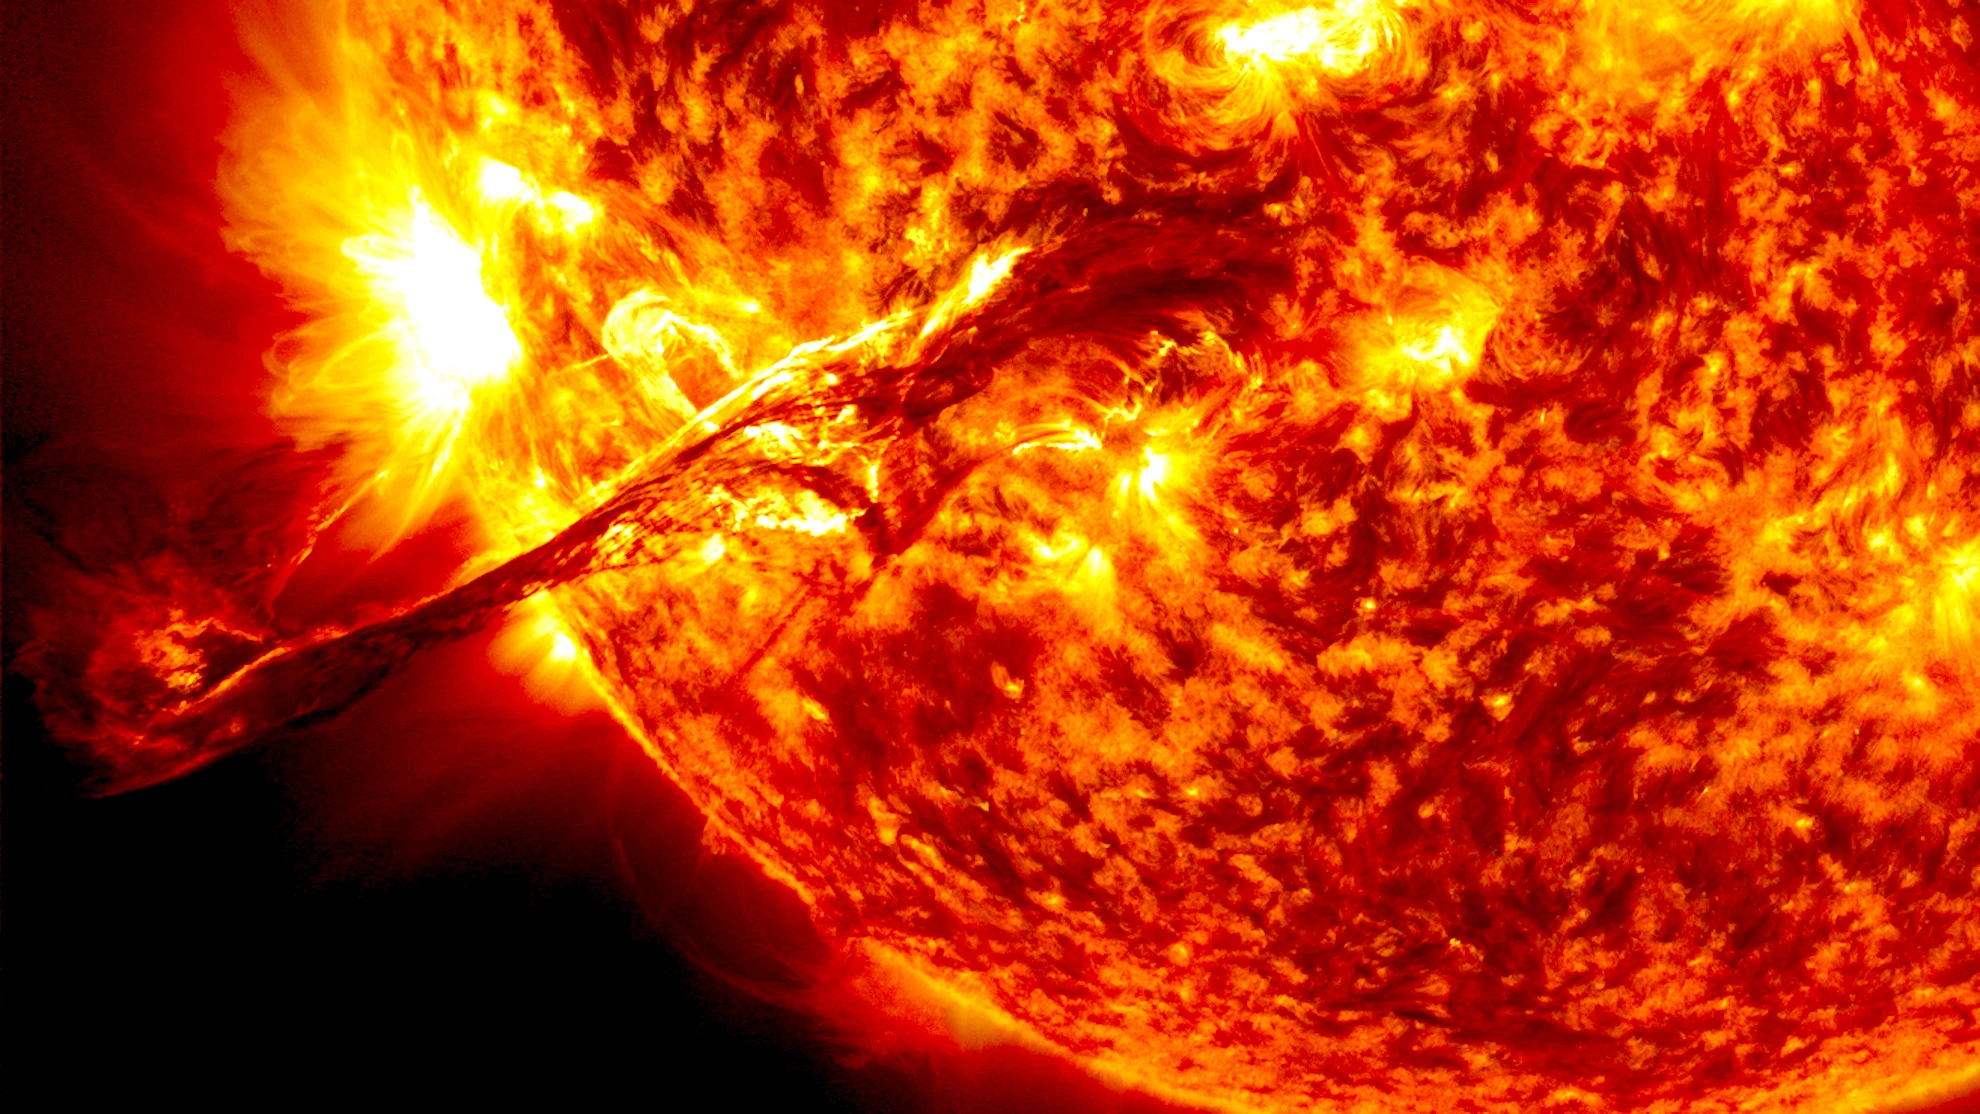 Largest solar storm ever revealed by ancient tree rings